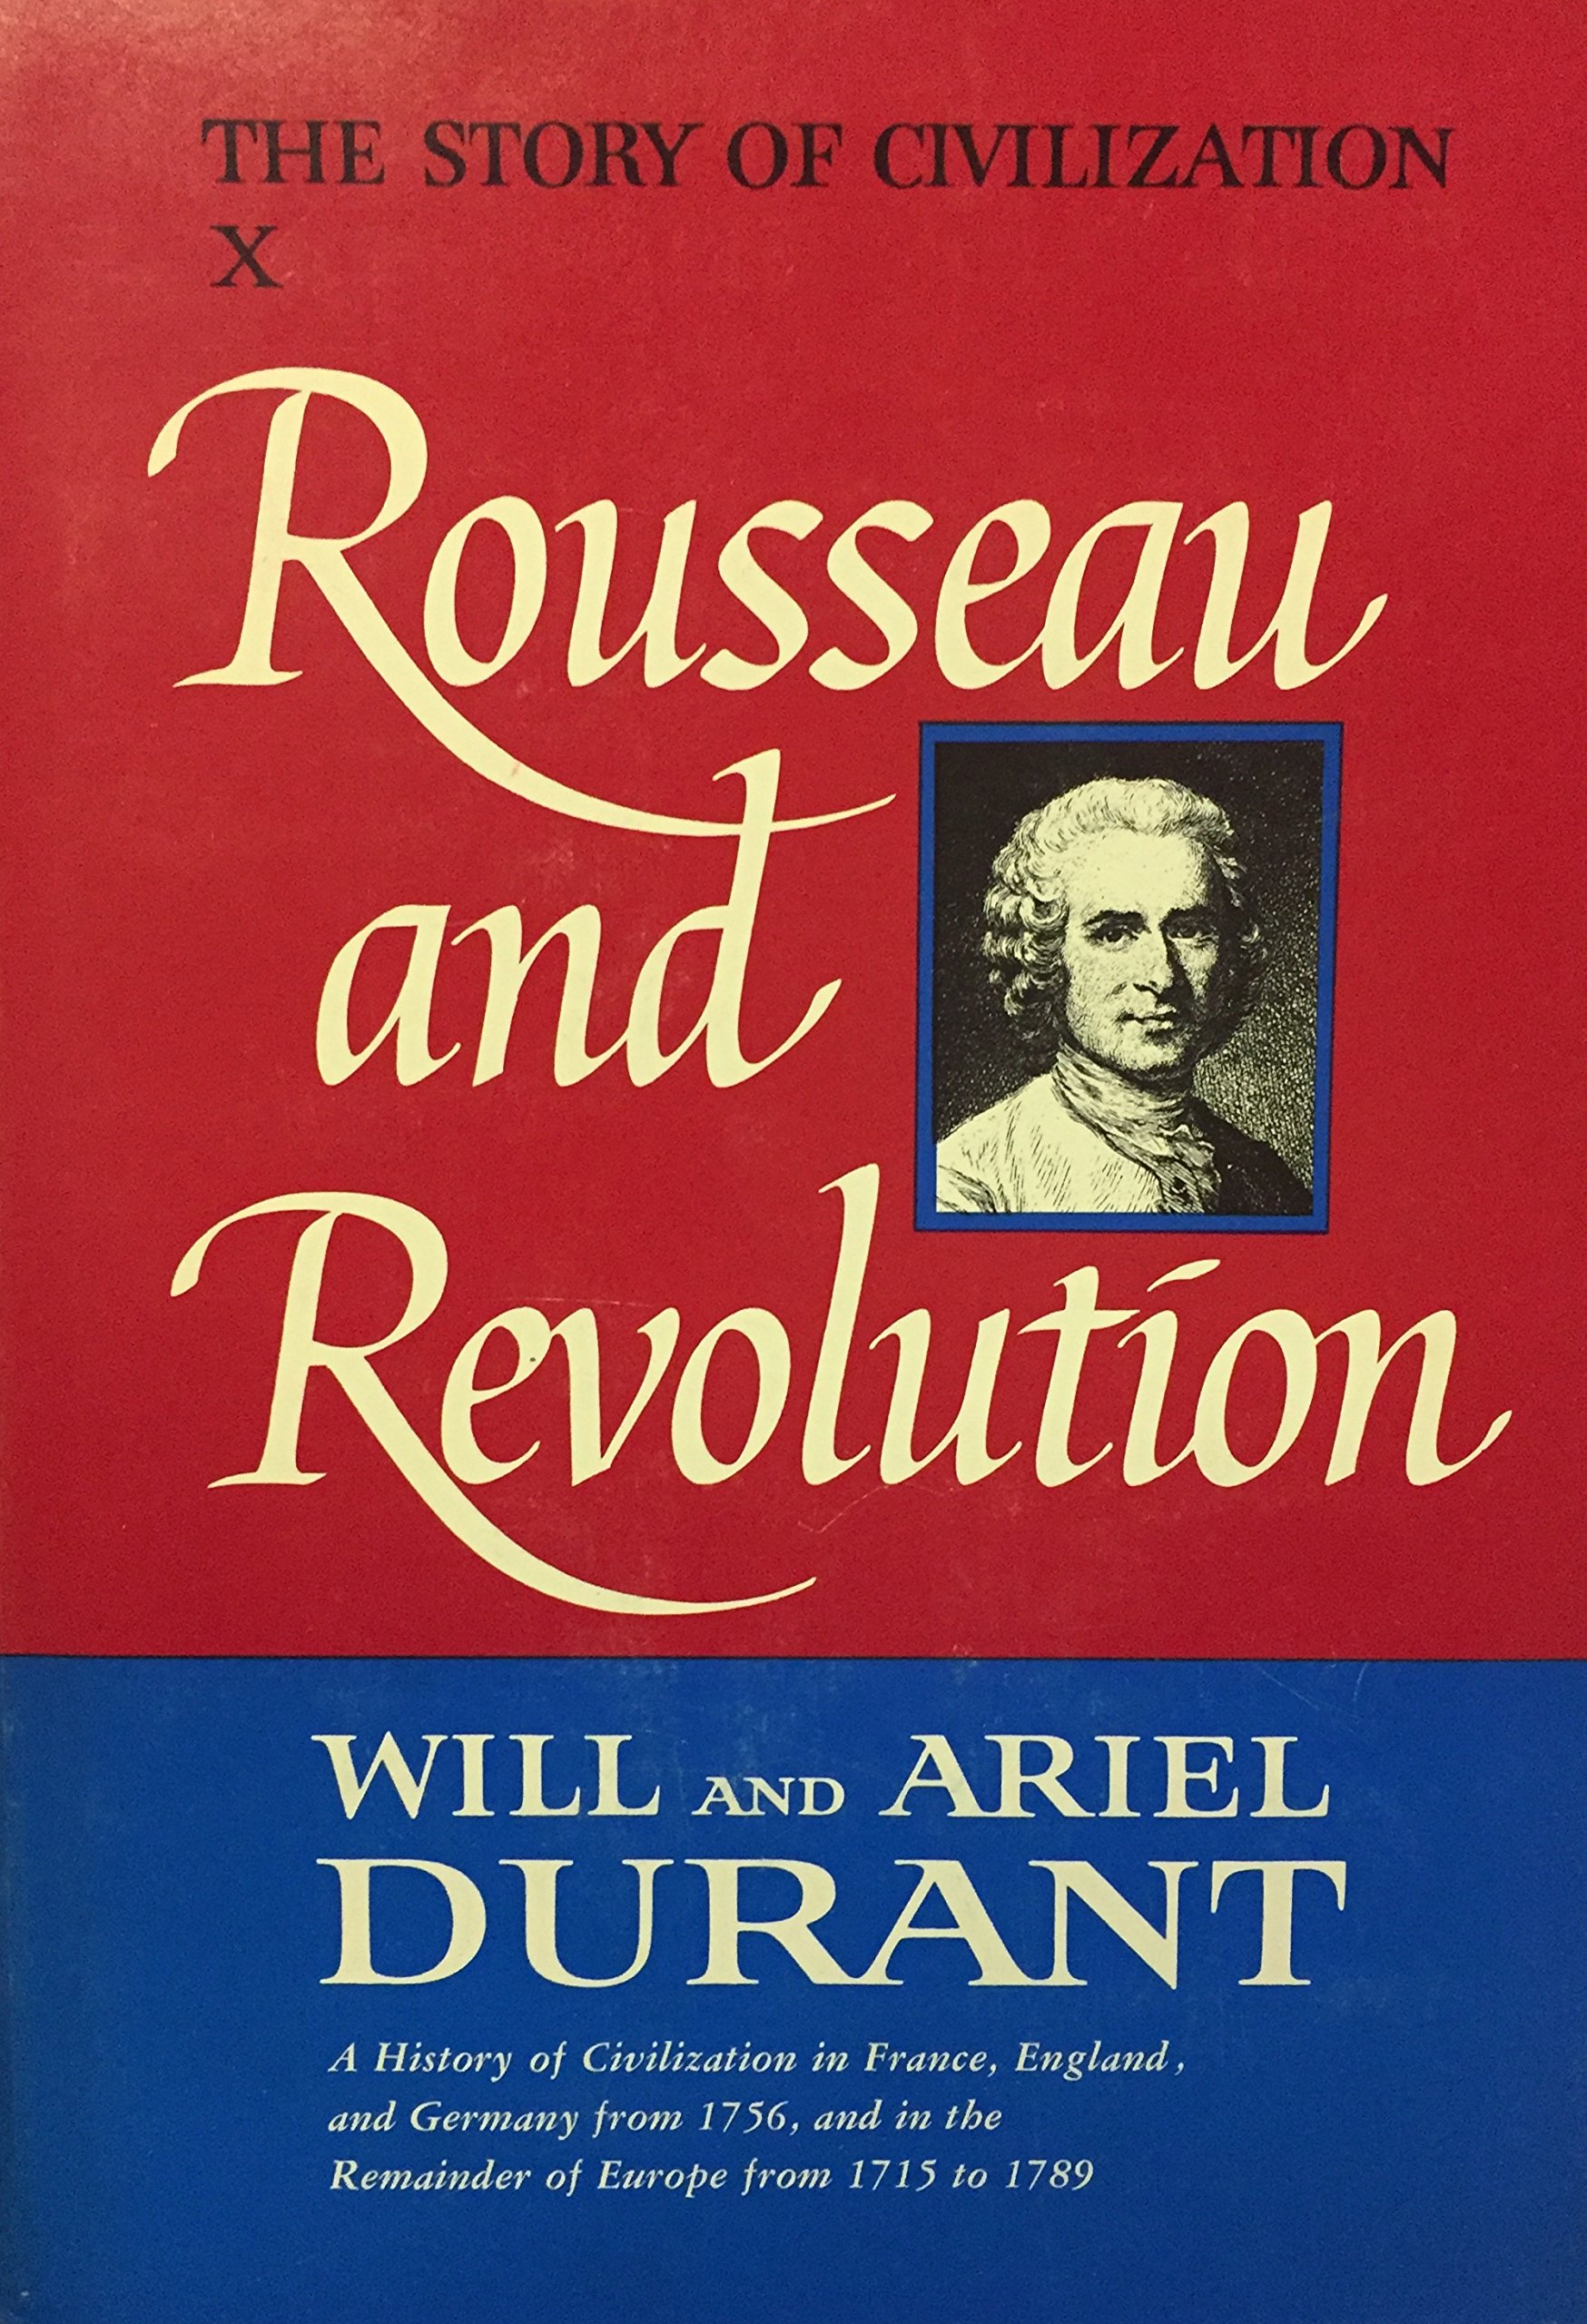 Will Durant, Ariel Durant: Rousseau and Revolution (Hardcover, 1967, Simon & Schuster)